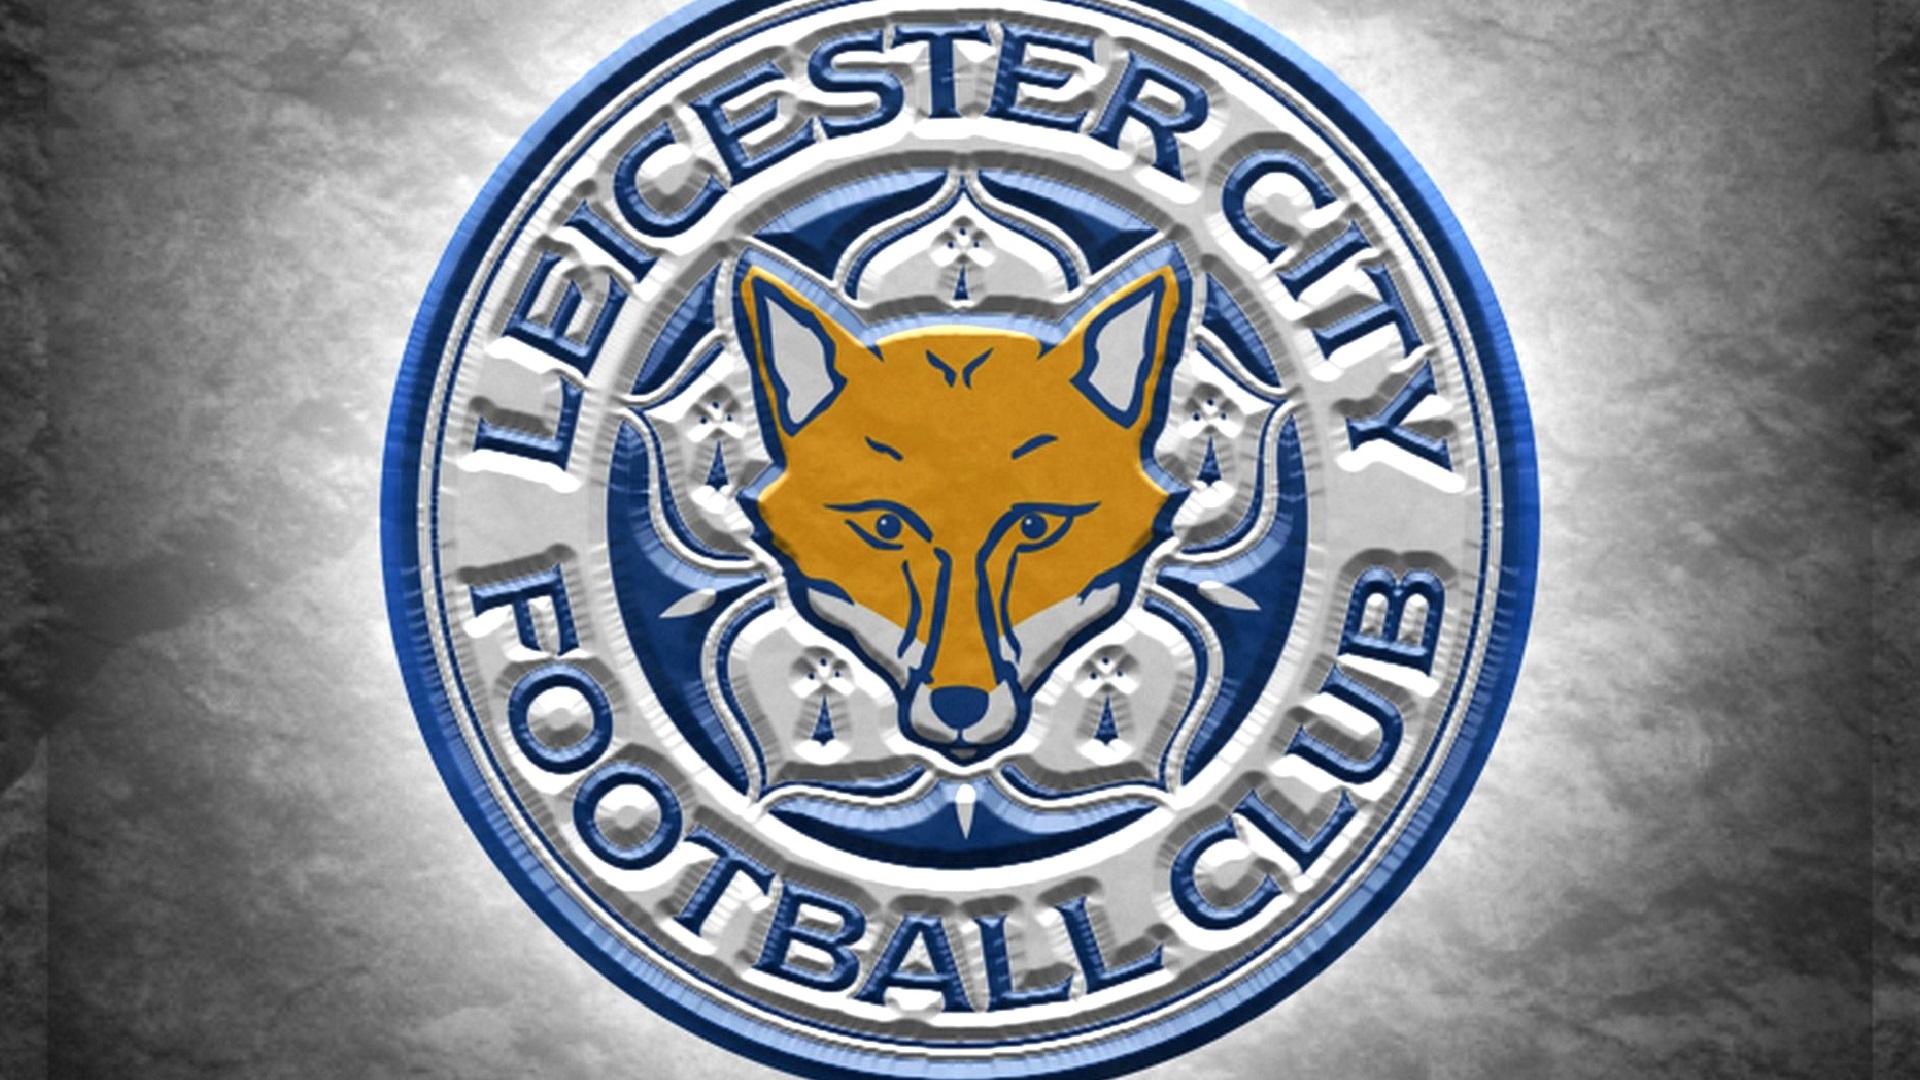 Wallpapers Leicester City With high-resolution 1920X1080 pixel. You can use this wallpaper for your Desktop Computers, Mac Screensavers, Windows Backgrounds, iPhone Wallpapers, Tablet or Android Lock screen and another Mobile device